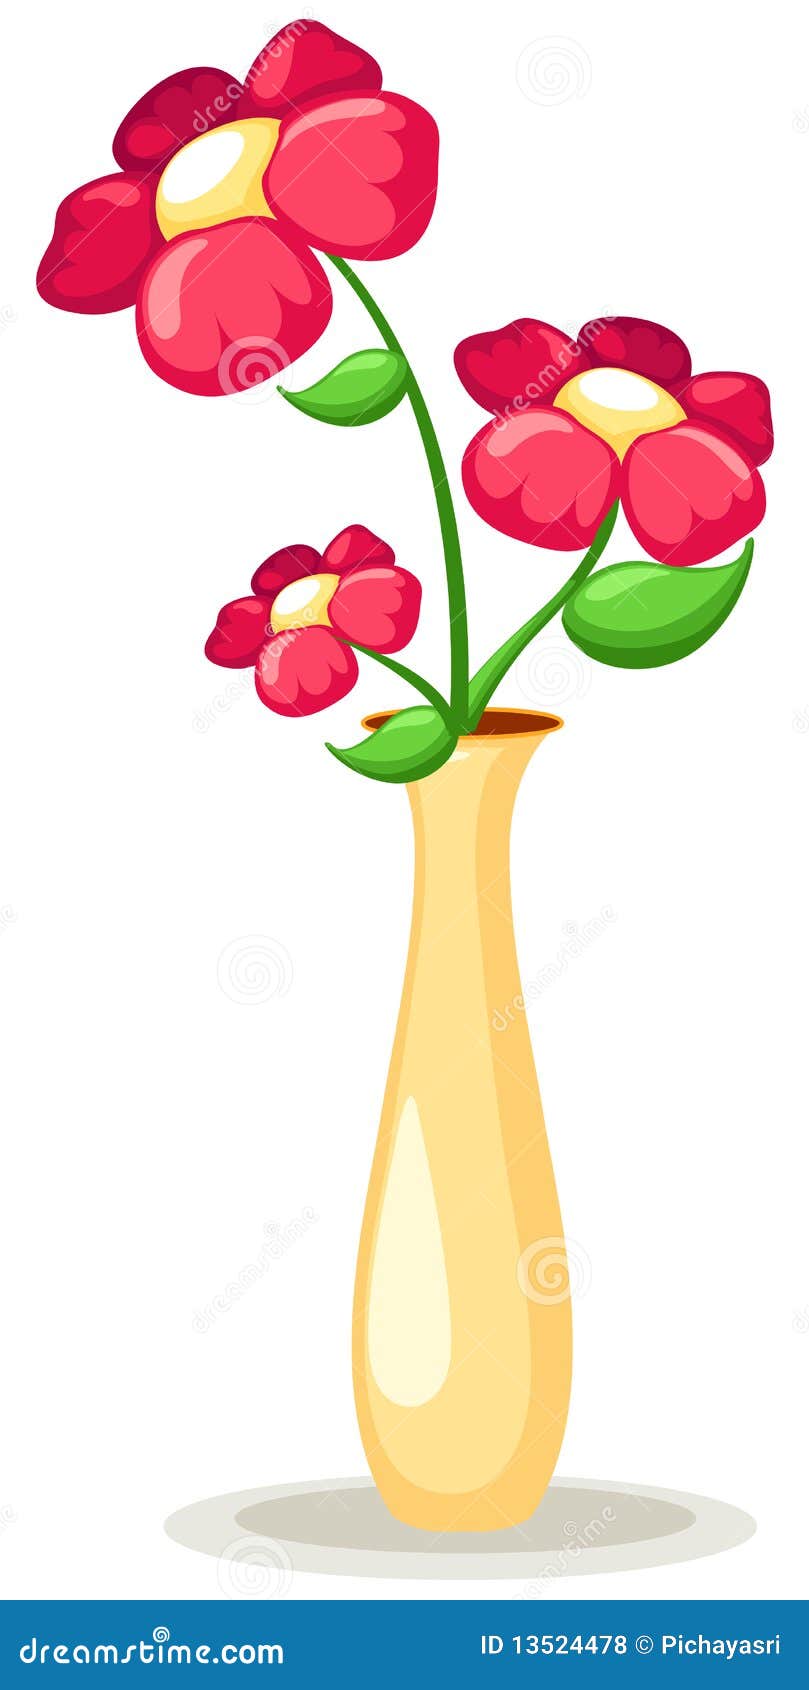 clipart of roses in a vase - photo #41